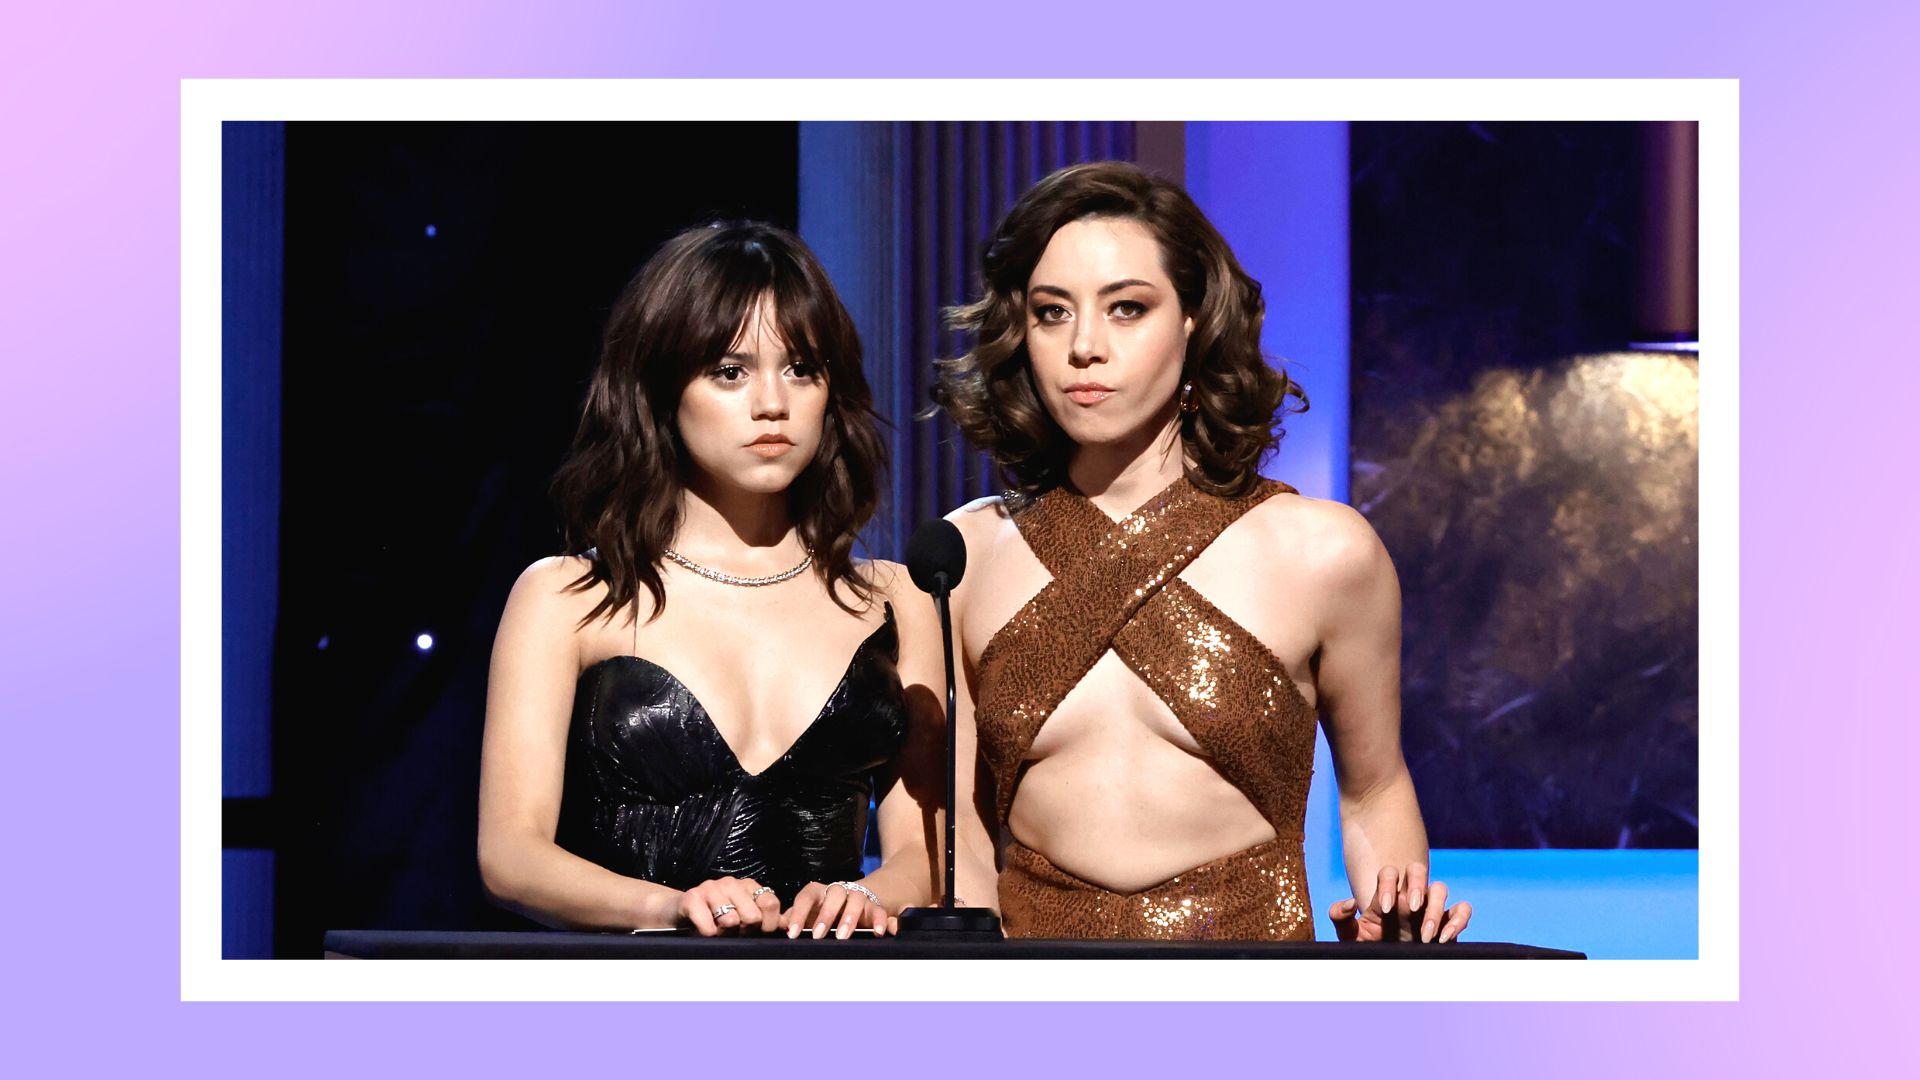 Jenna Ortega and Aubrey Plaza had the audience howling over their pair